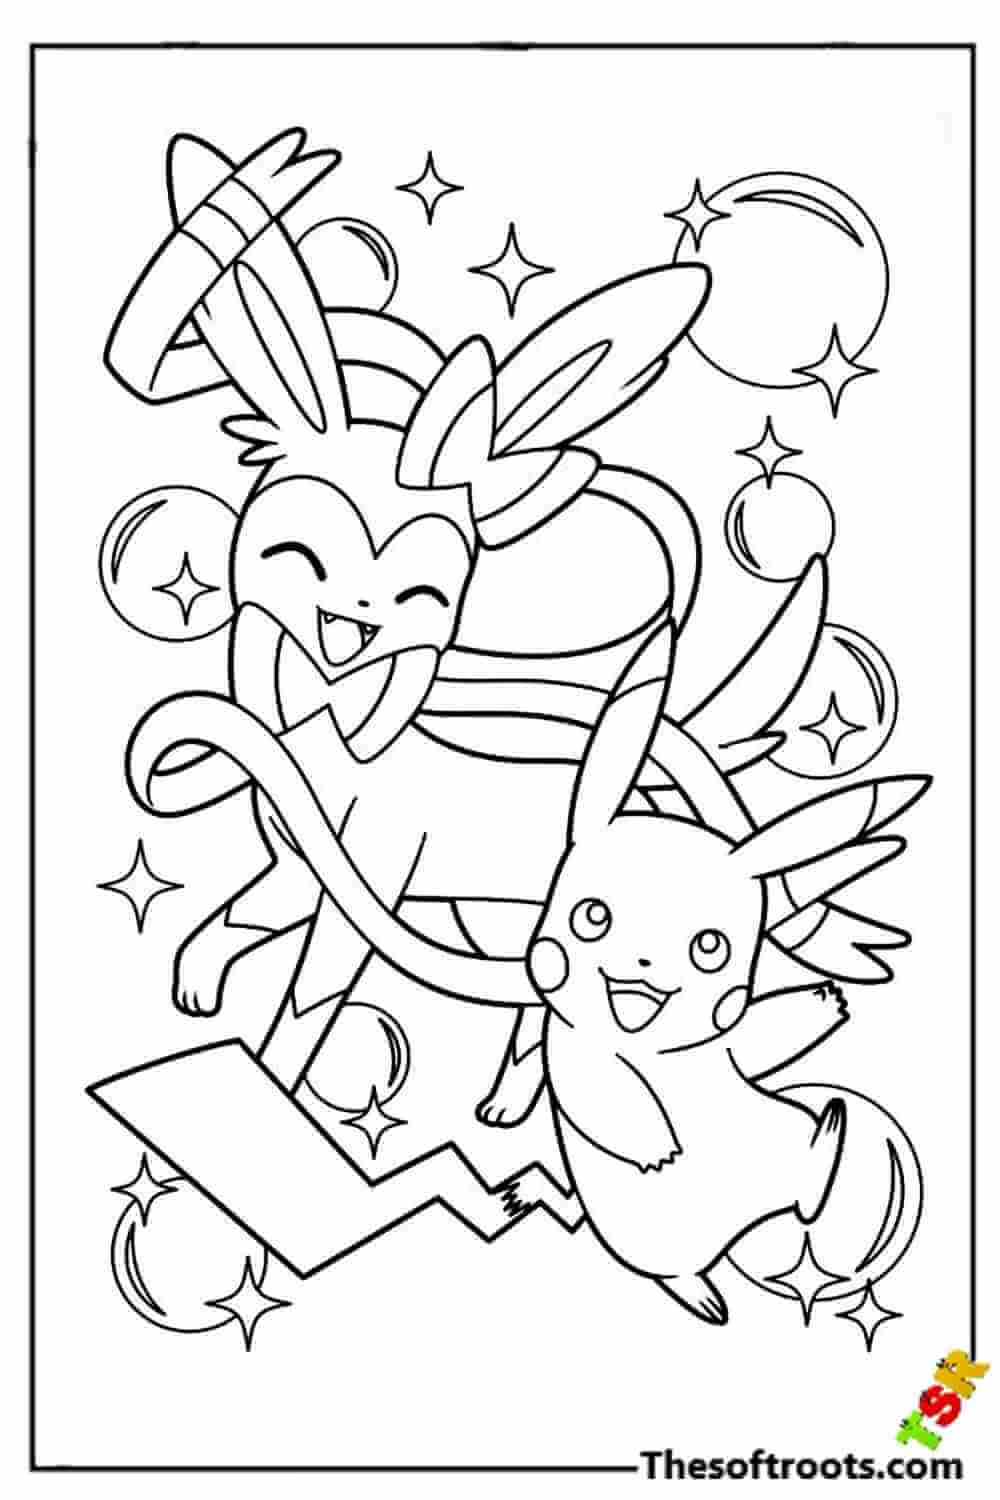 Pikachu and Eevee coloring pages